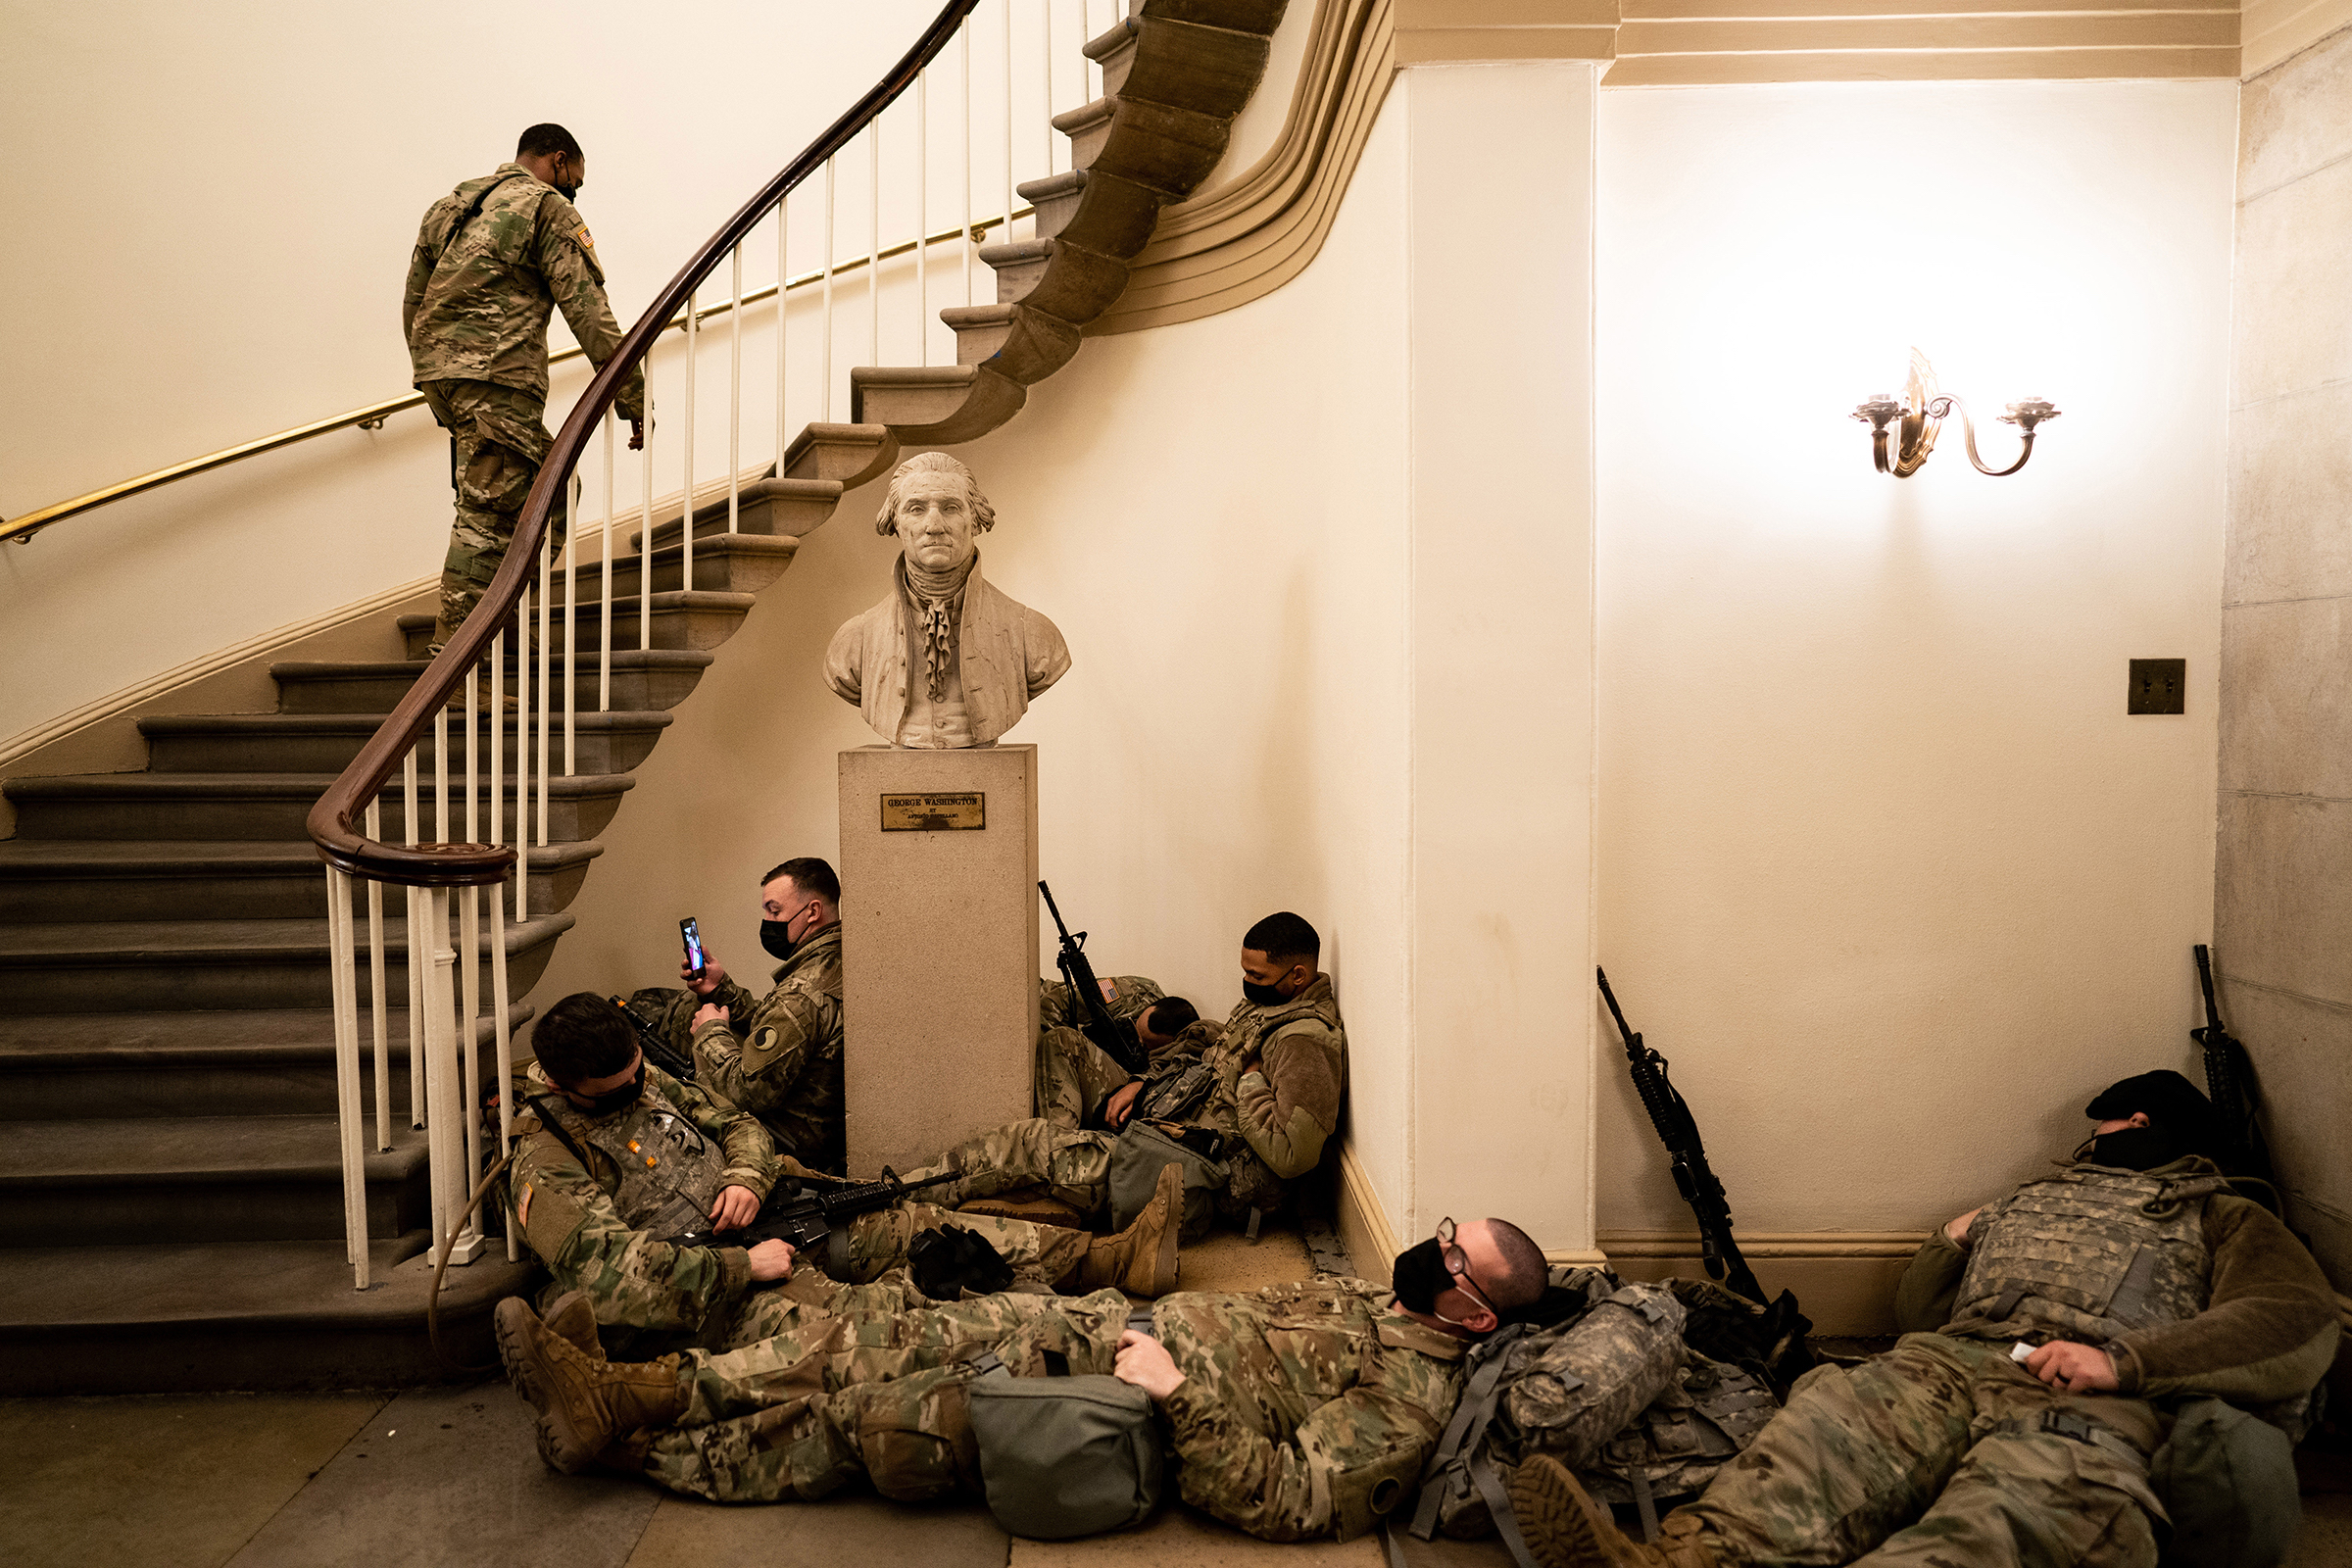 Members of the National Guard rest in the Capitol during a break in shifts as the House of Representatives prepares to vote on impeaching President Donald Trump in Washington, D.C., on Jan. 13. Trump was impeached a historic second time, one week before the end of his presidency. (Erin Schaff—The New York Times/Redux)